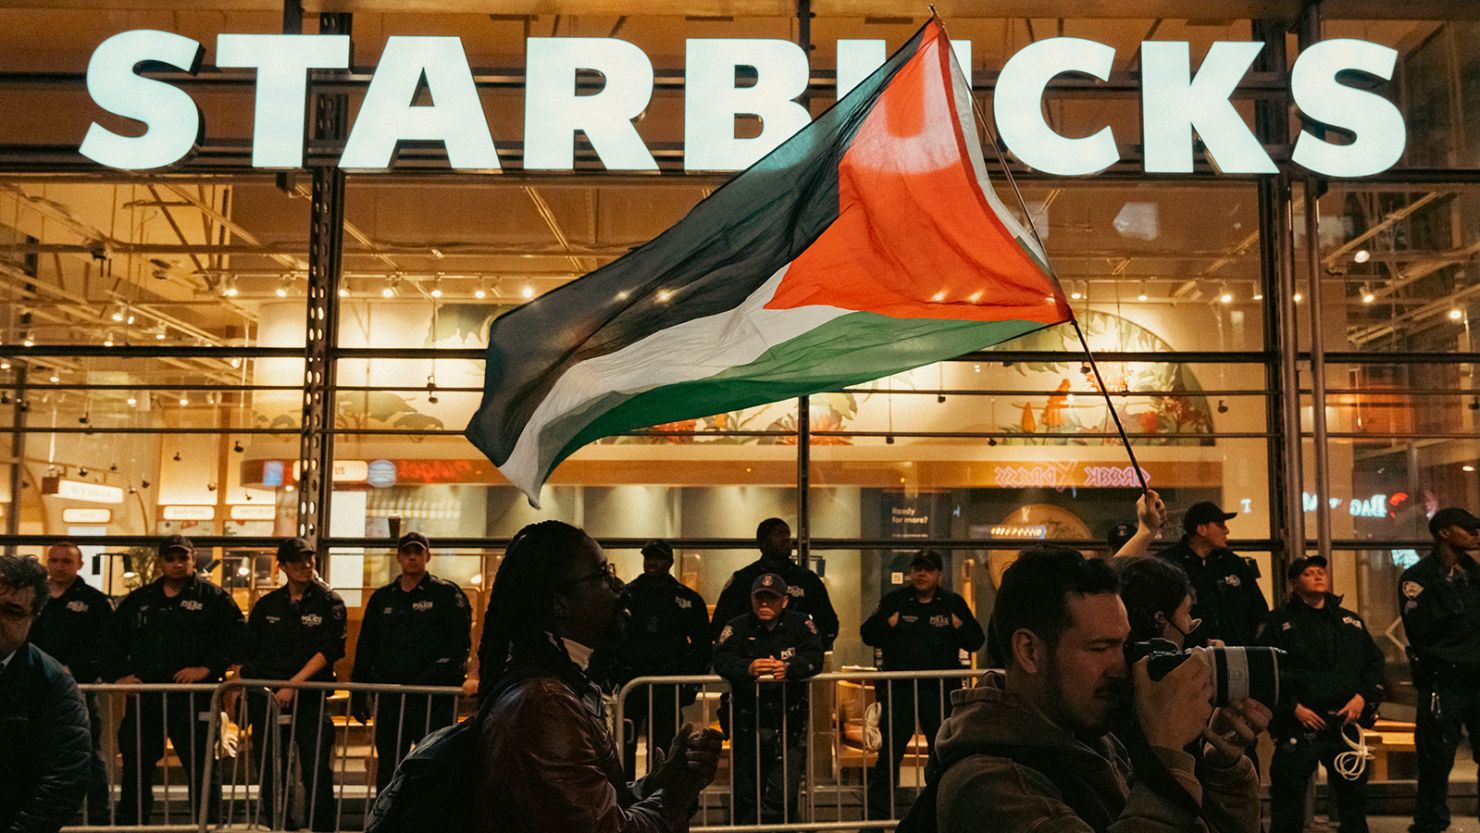 Police officers are seen barricading a Starbucks retail store from thousands of demonstrators supporting Palestine in New York City last month. Starbucks stores have seen an increase in vandalism.